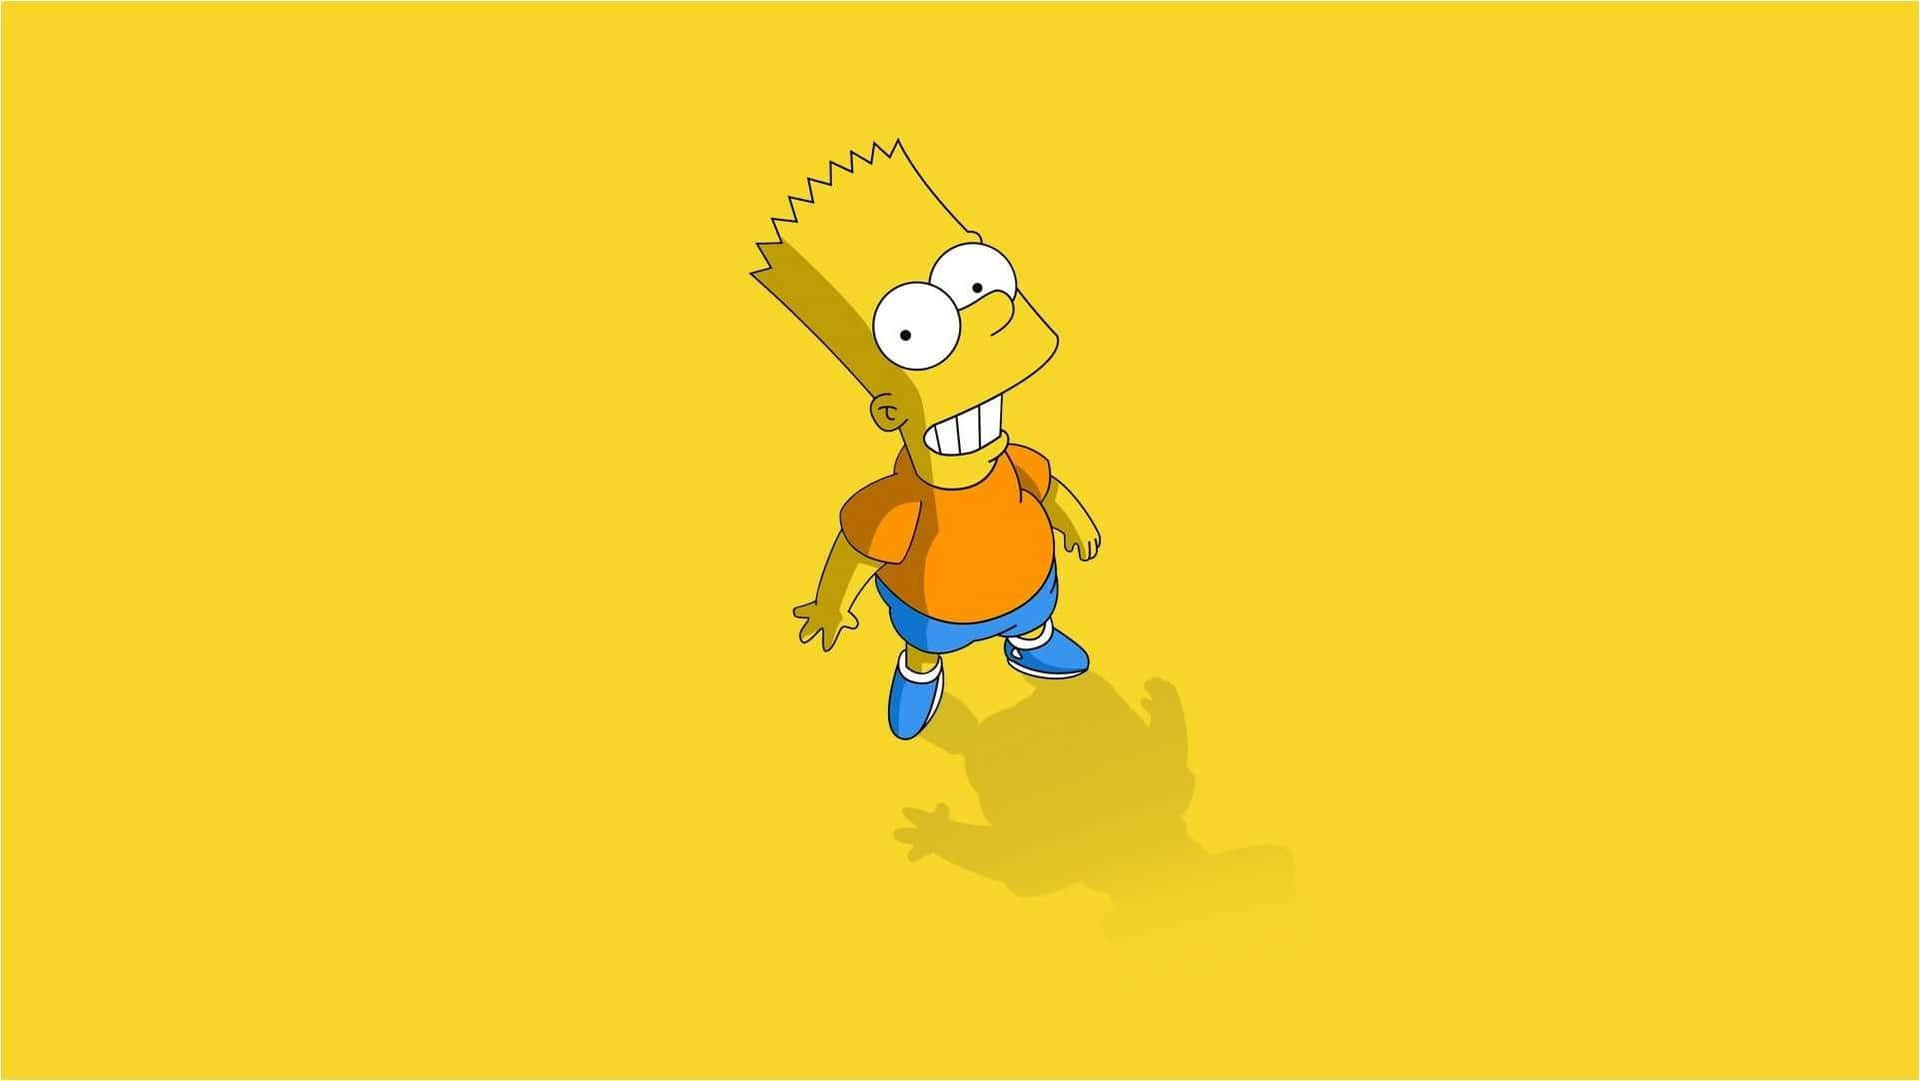 “Live free and enjoy yourself!” – Bart Simpson Wallpaper